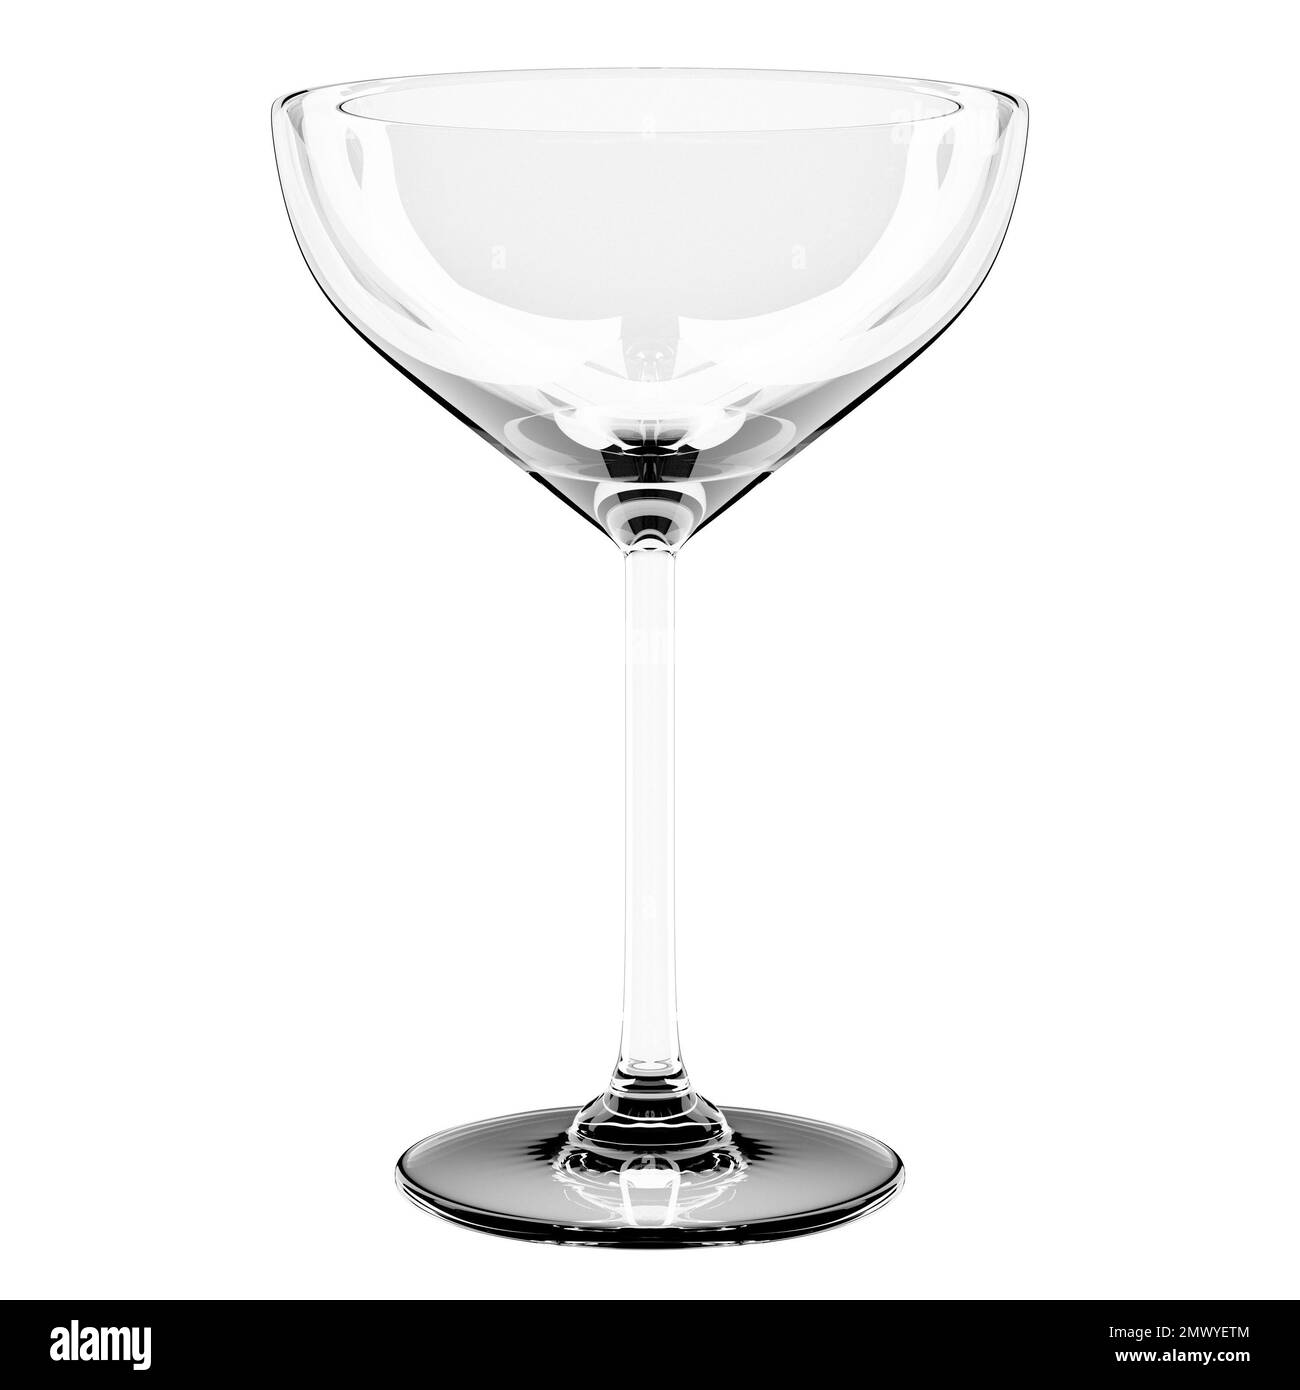 3d illustration of a glass martini goblet on a white  background. Glass realistic illustration Stock Photo